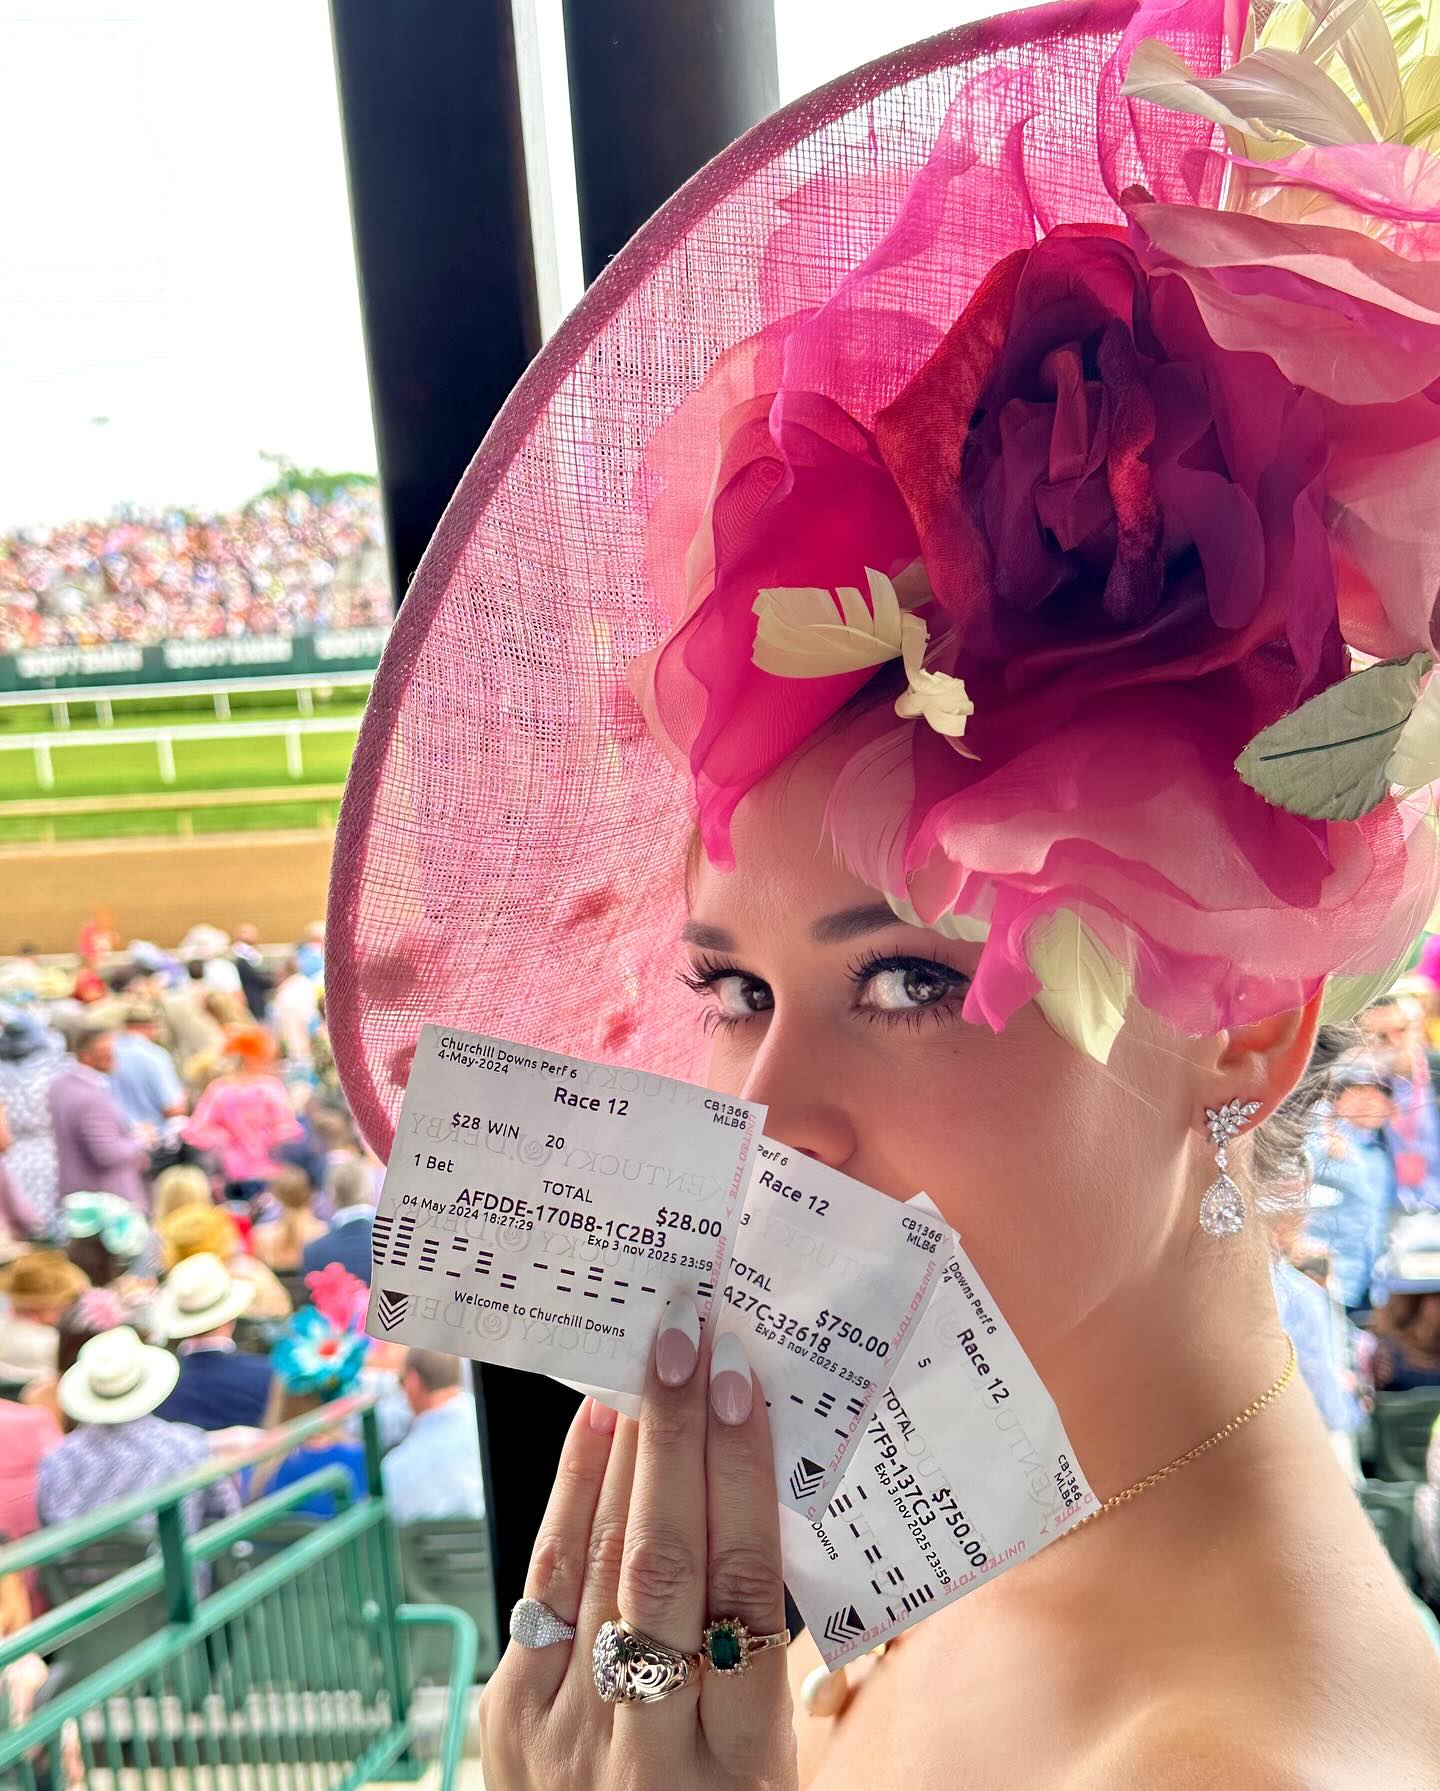 The Kentucky Derby 150 will always be one of the BEST experiences I’ve ever had!!!! 🐎🌹 From picking the winning horse “Mystic Dan”, celebrating Mark’s 36th birthday, & passing out with my mouth wide open on the ride home, I’d like to thank the Kendall Jackson Wine Family for inviting us, @macduggal for styling me & @nadrijewelry for the stunning jewelry. THAT WAS MAGICAL!! 🪄✨ #macduggal #nadrijewelry #kentuckyderby #kendalljackson #mysticdan #happybirthdaybabe